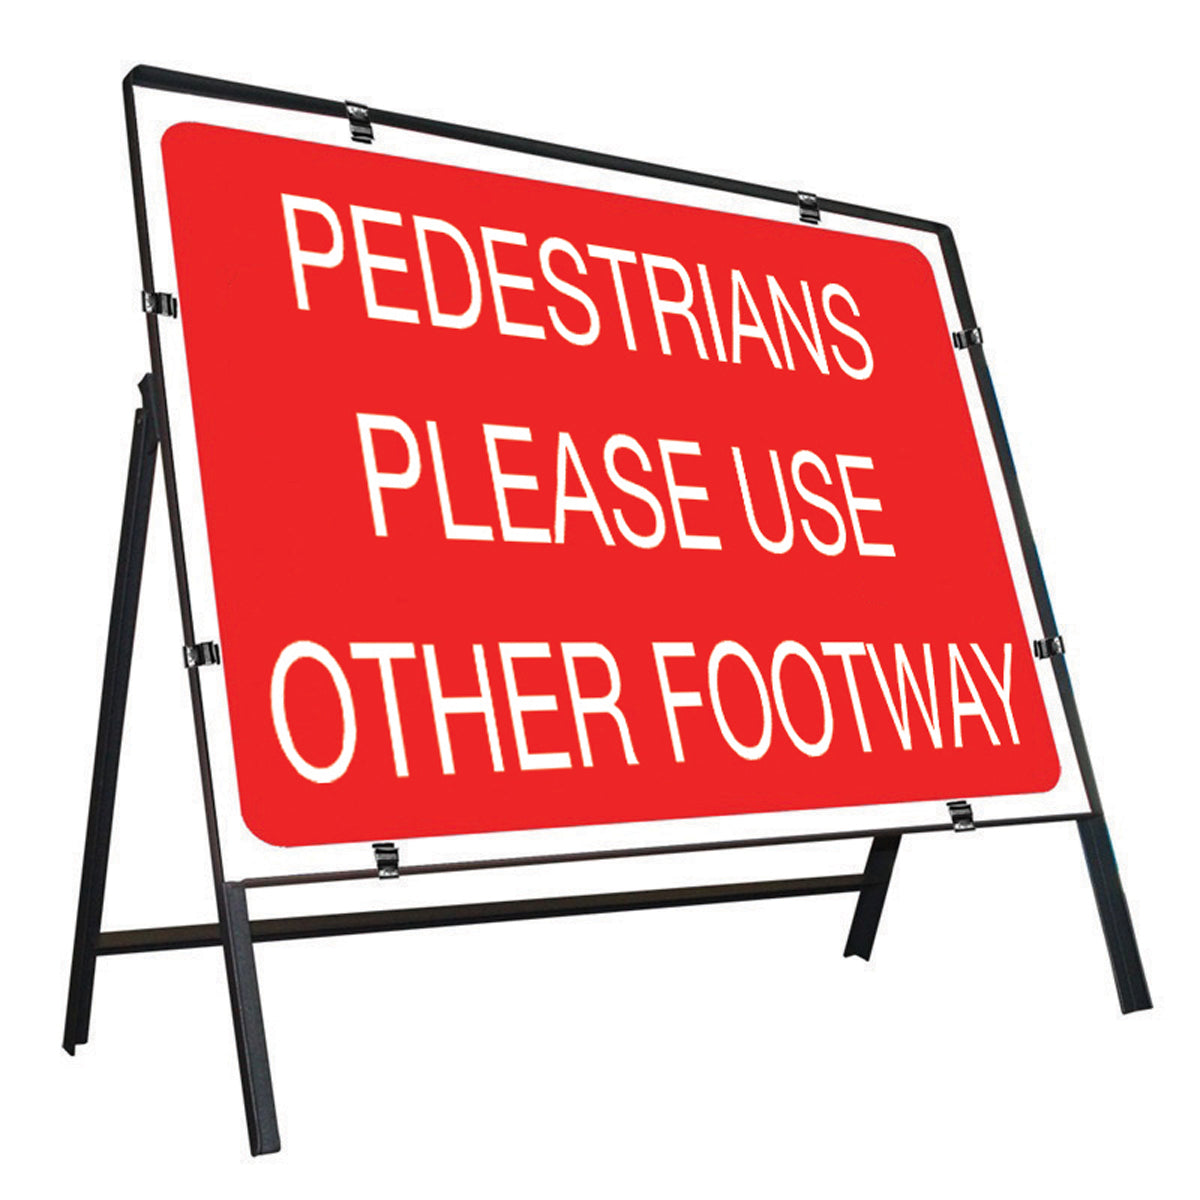 Metal Road Sign Pedestrians Please Use Other Footway - Orbit - Temporary Road Signs - Lapwing UK